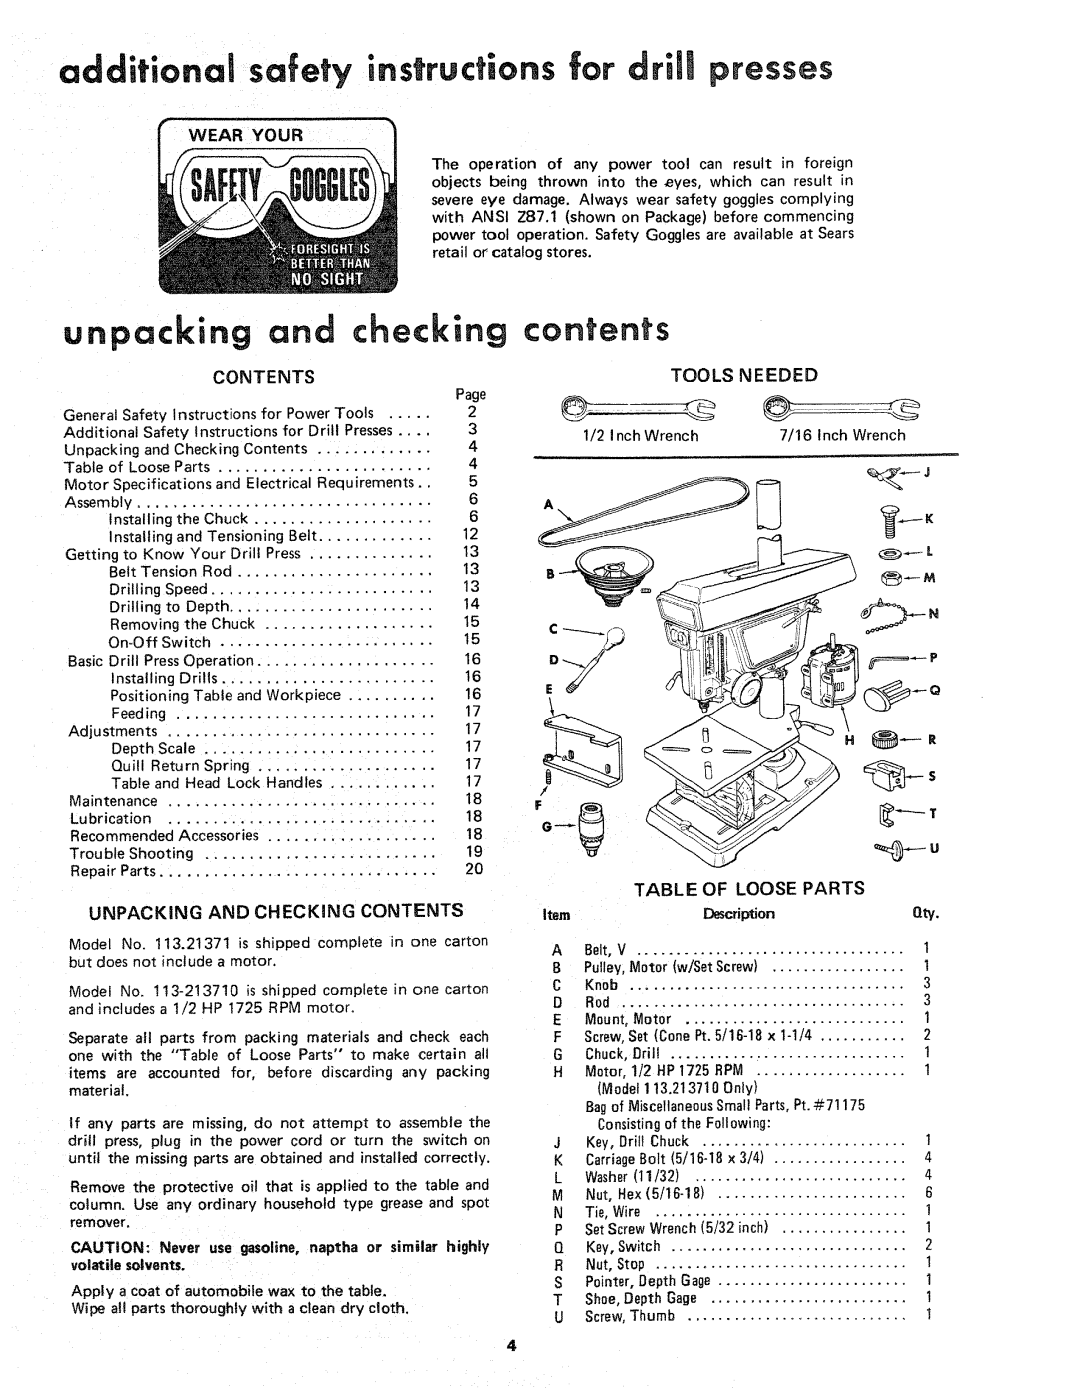 Sears 113.21371 manual additional safety instructions for drill presses, unpacking checking, contents, Wear Your 